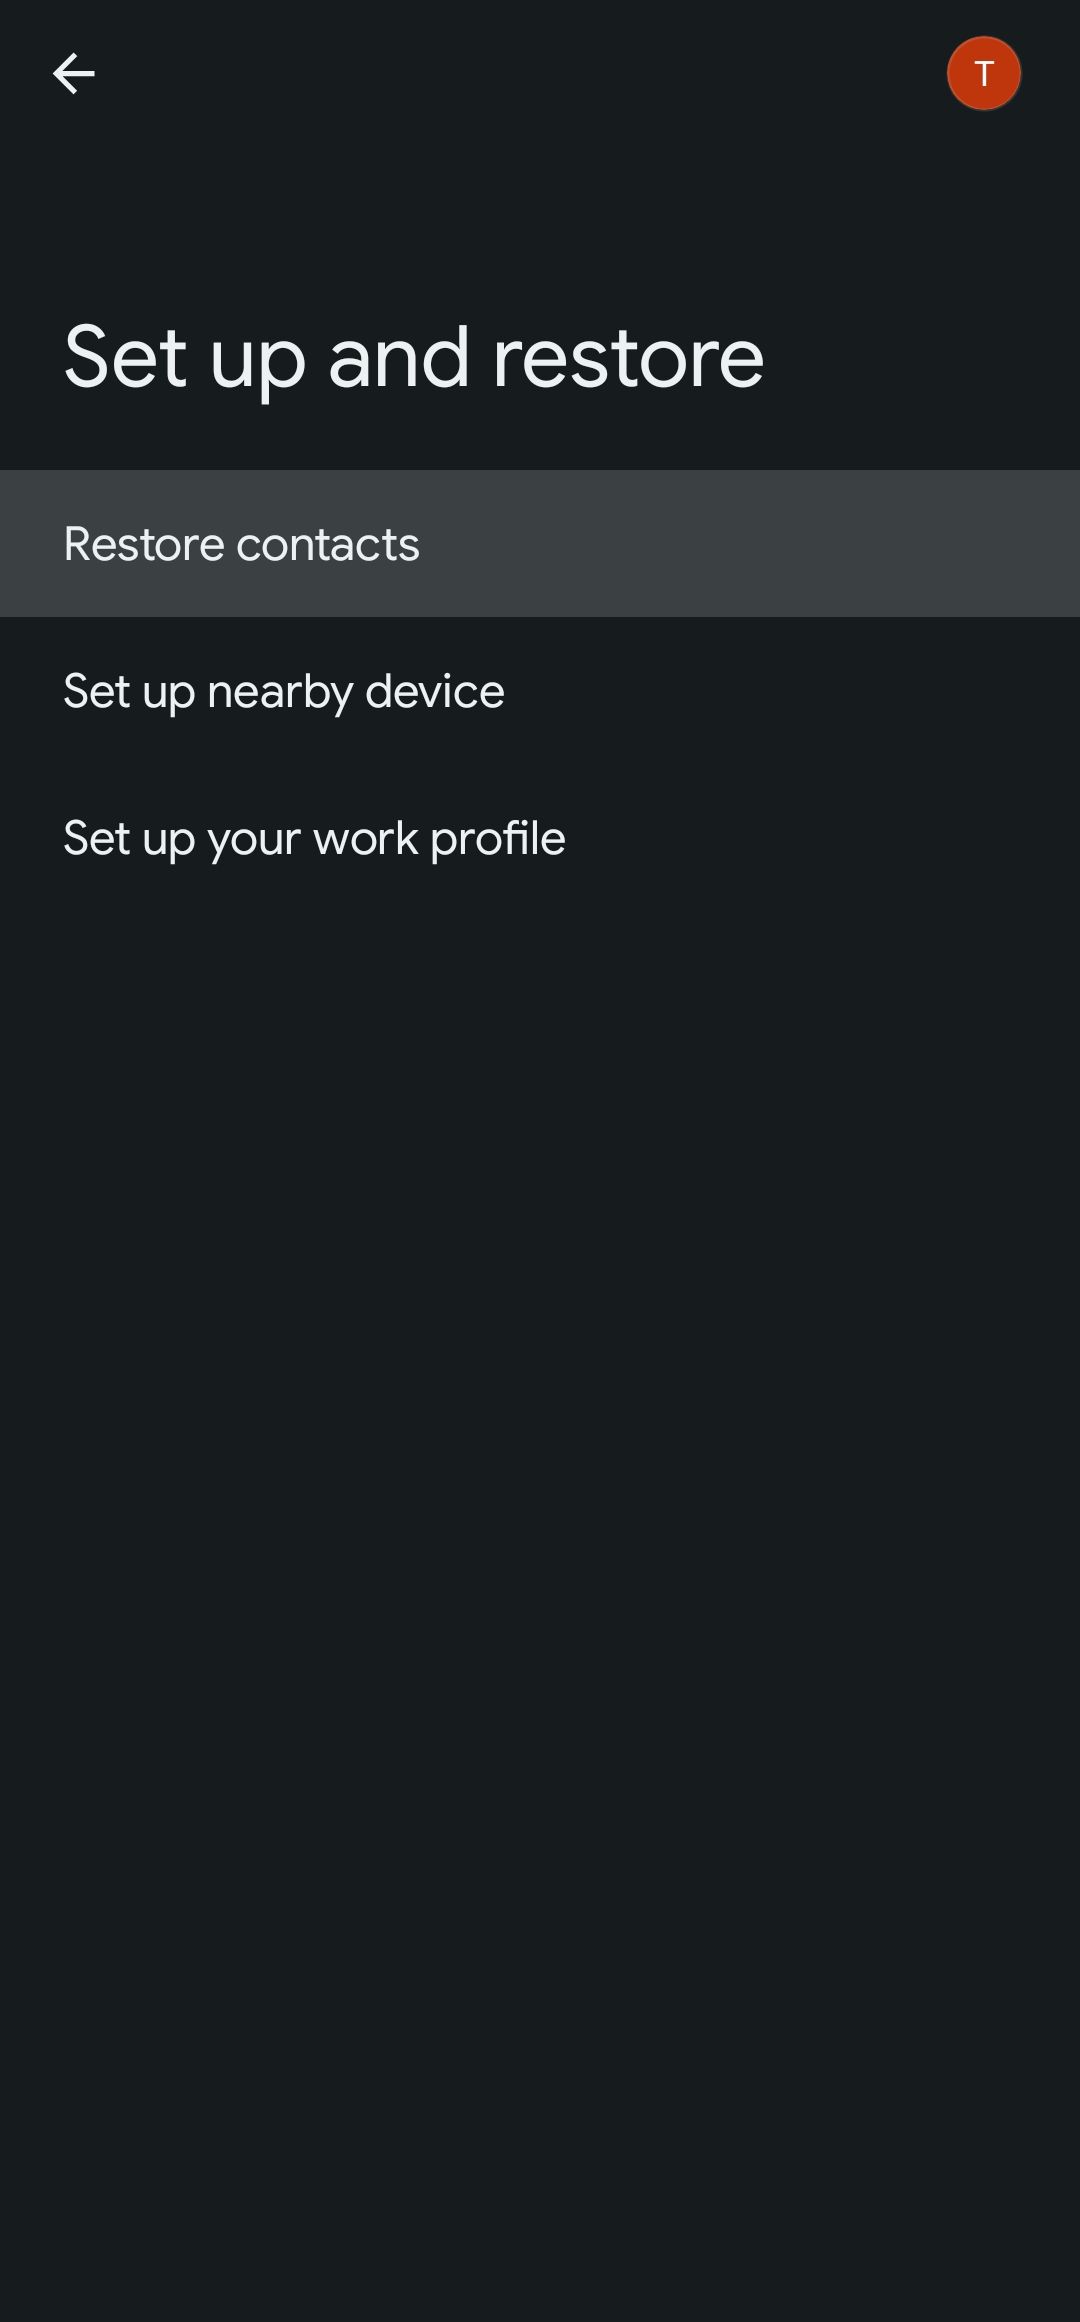 Tap the 'Restore contacts' option